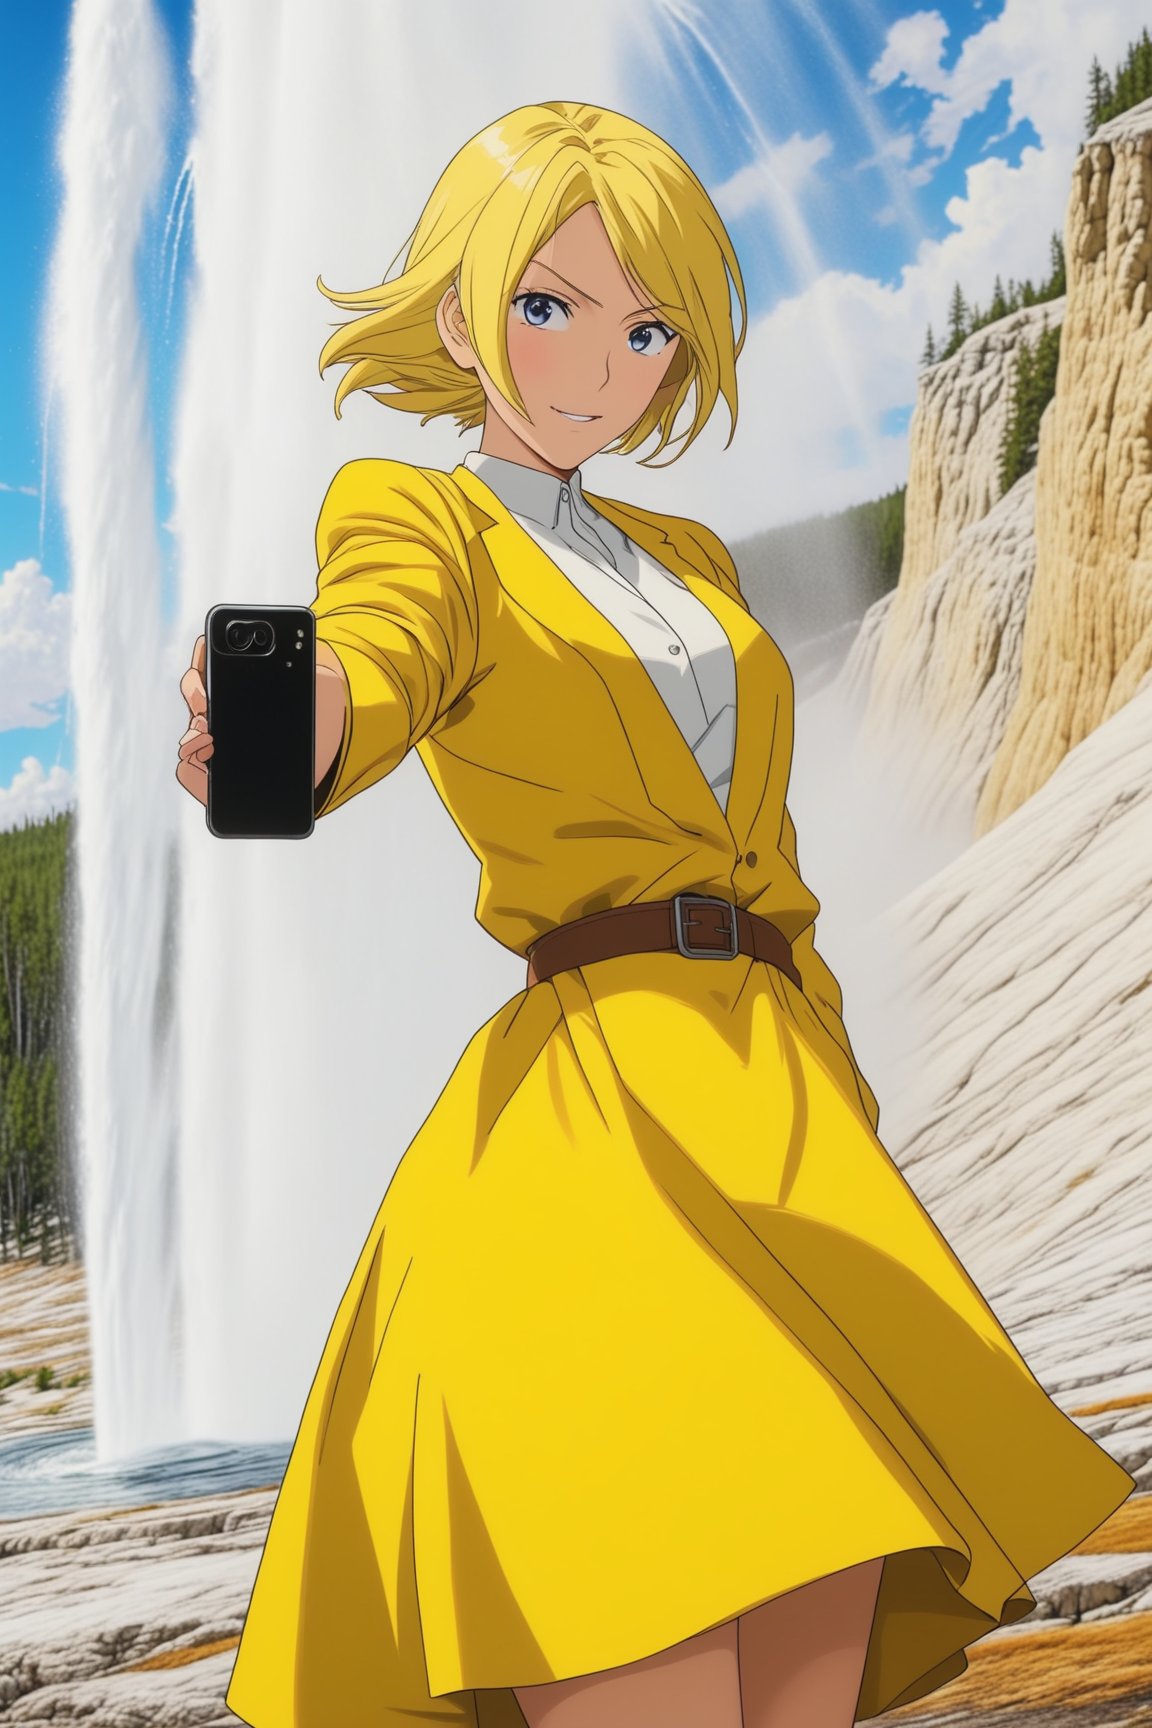 Highly-detailed beautiful girl,20yo,kuchiki rukia\(bleach\),taking selfie of Old Faithful of Yellowstone,highly-detailed exquisite face,soft shiny skin,detailed eyes,perfect female form,hourglass figure,long yellow hair,elegant pink jacket and jean skirt,smile,perfect hands,perfect fingers,vibrant colors,looking at viewer,1girl,solo,dynamic sexy pose,(halfbody shot:1.3),(backdrop: oldfa1thfu1,outdoors,blue sky,tree,scenery,realistic,detailed soil,mostly white soil with some brown),(girl full frame:1.5),(upperbody  close-up shot:1.5)
BREAK
trending on artstation,rule of thirds,perfect composition,cinematic lighting,anime style,ultra-detailed,masterpiece,sharp focus,high contrast,art_booster,ani_booster, photo_b00ster,real_booster,ye11owst0ne